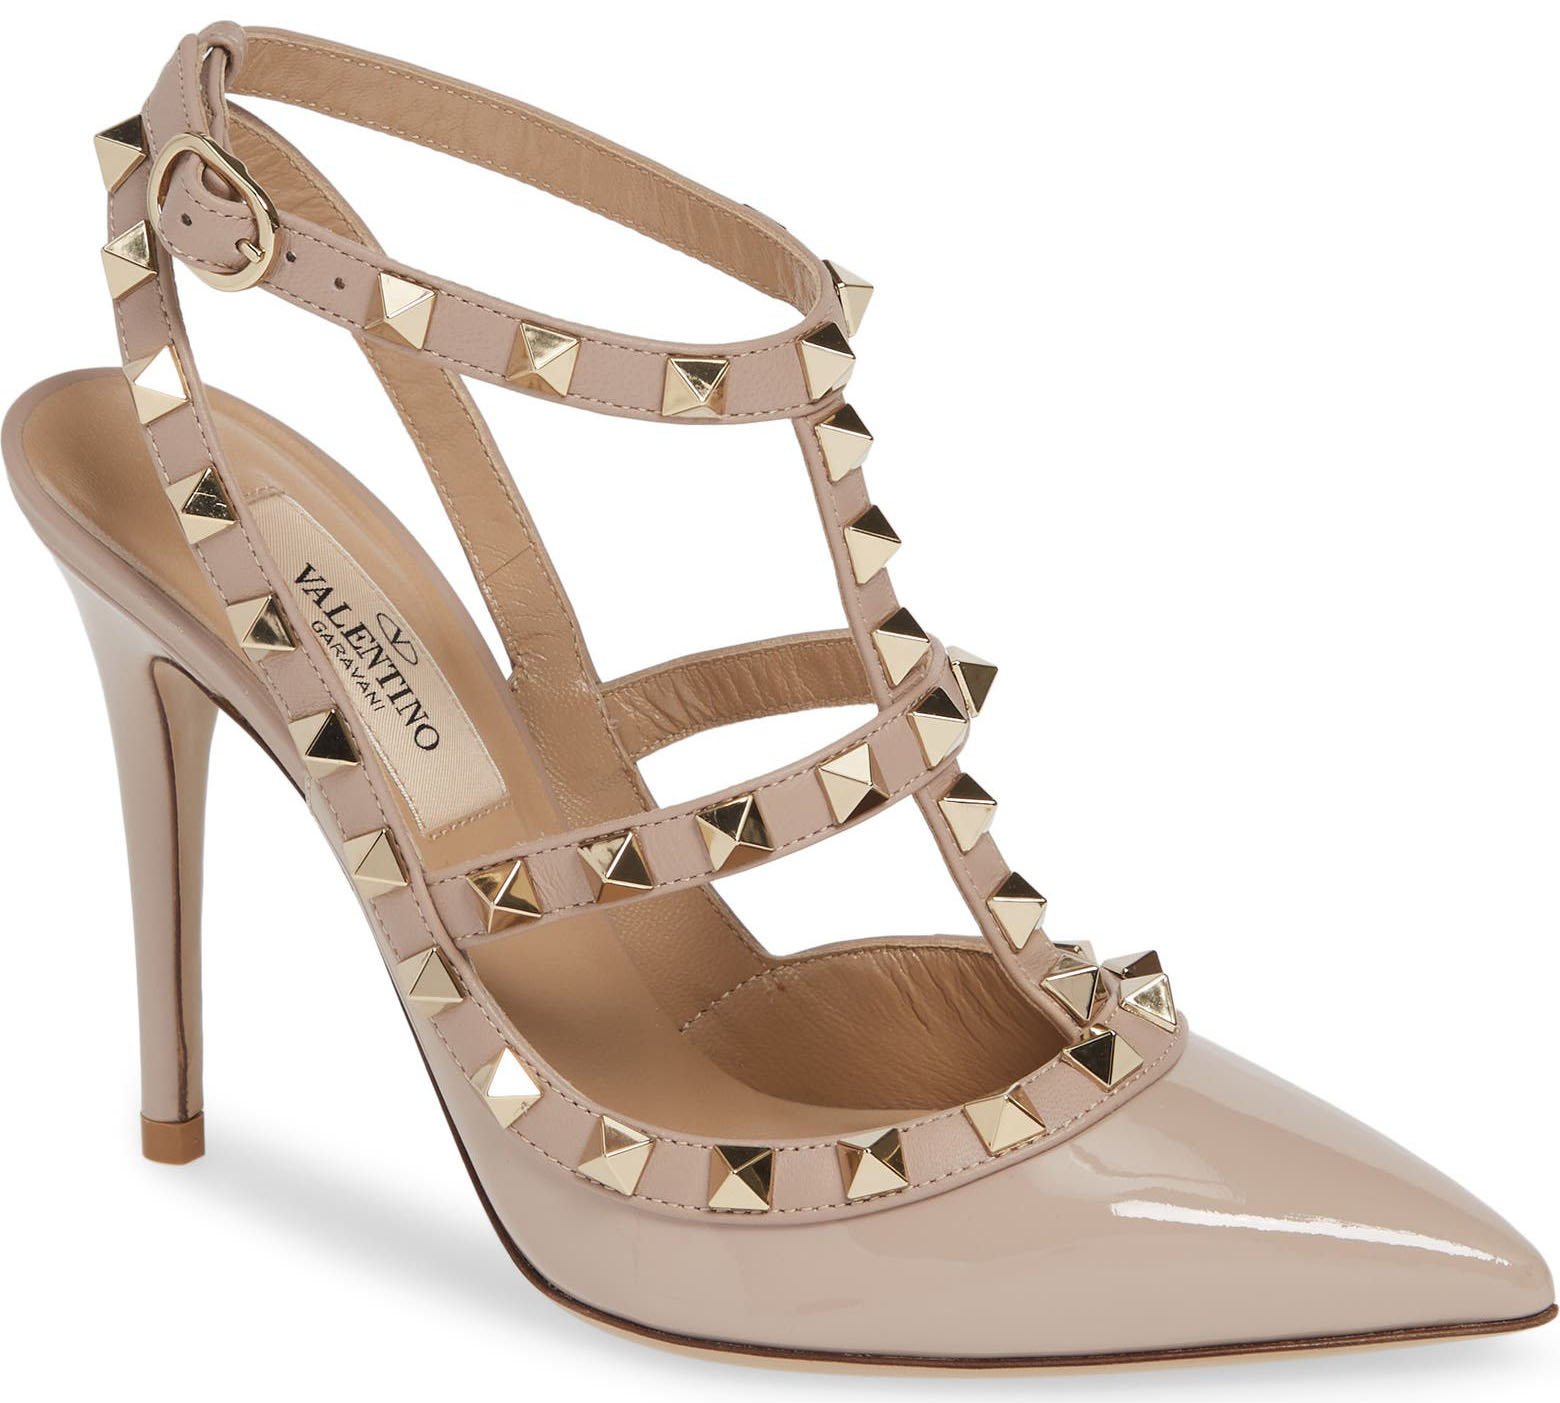 These Valentino pumps have signature pyramid studs that trim the caged upper design